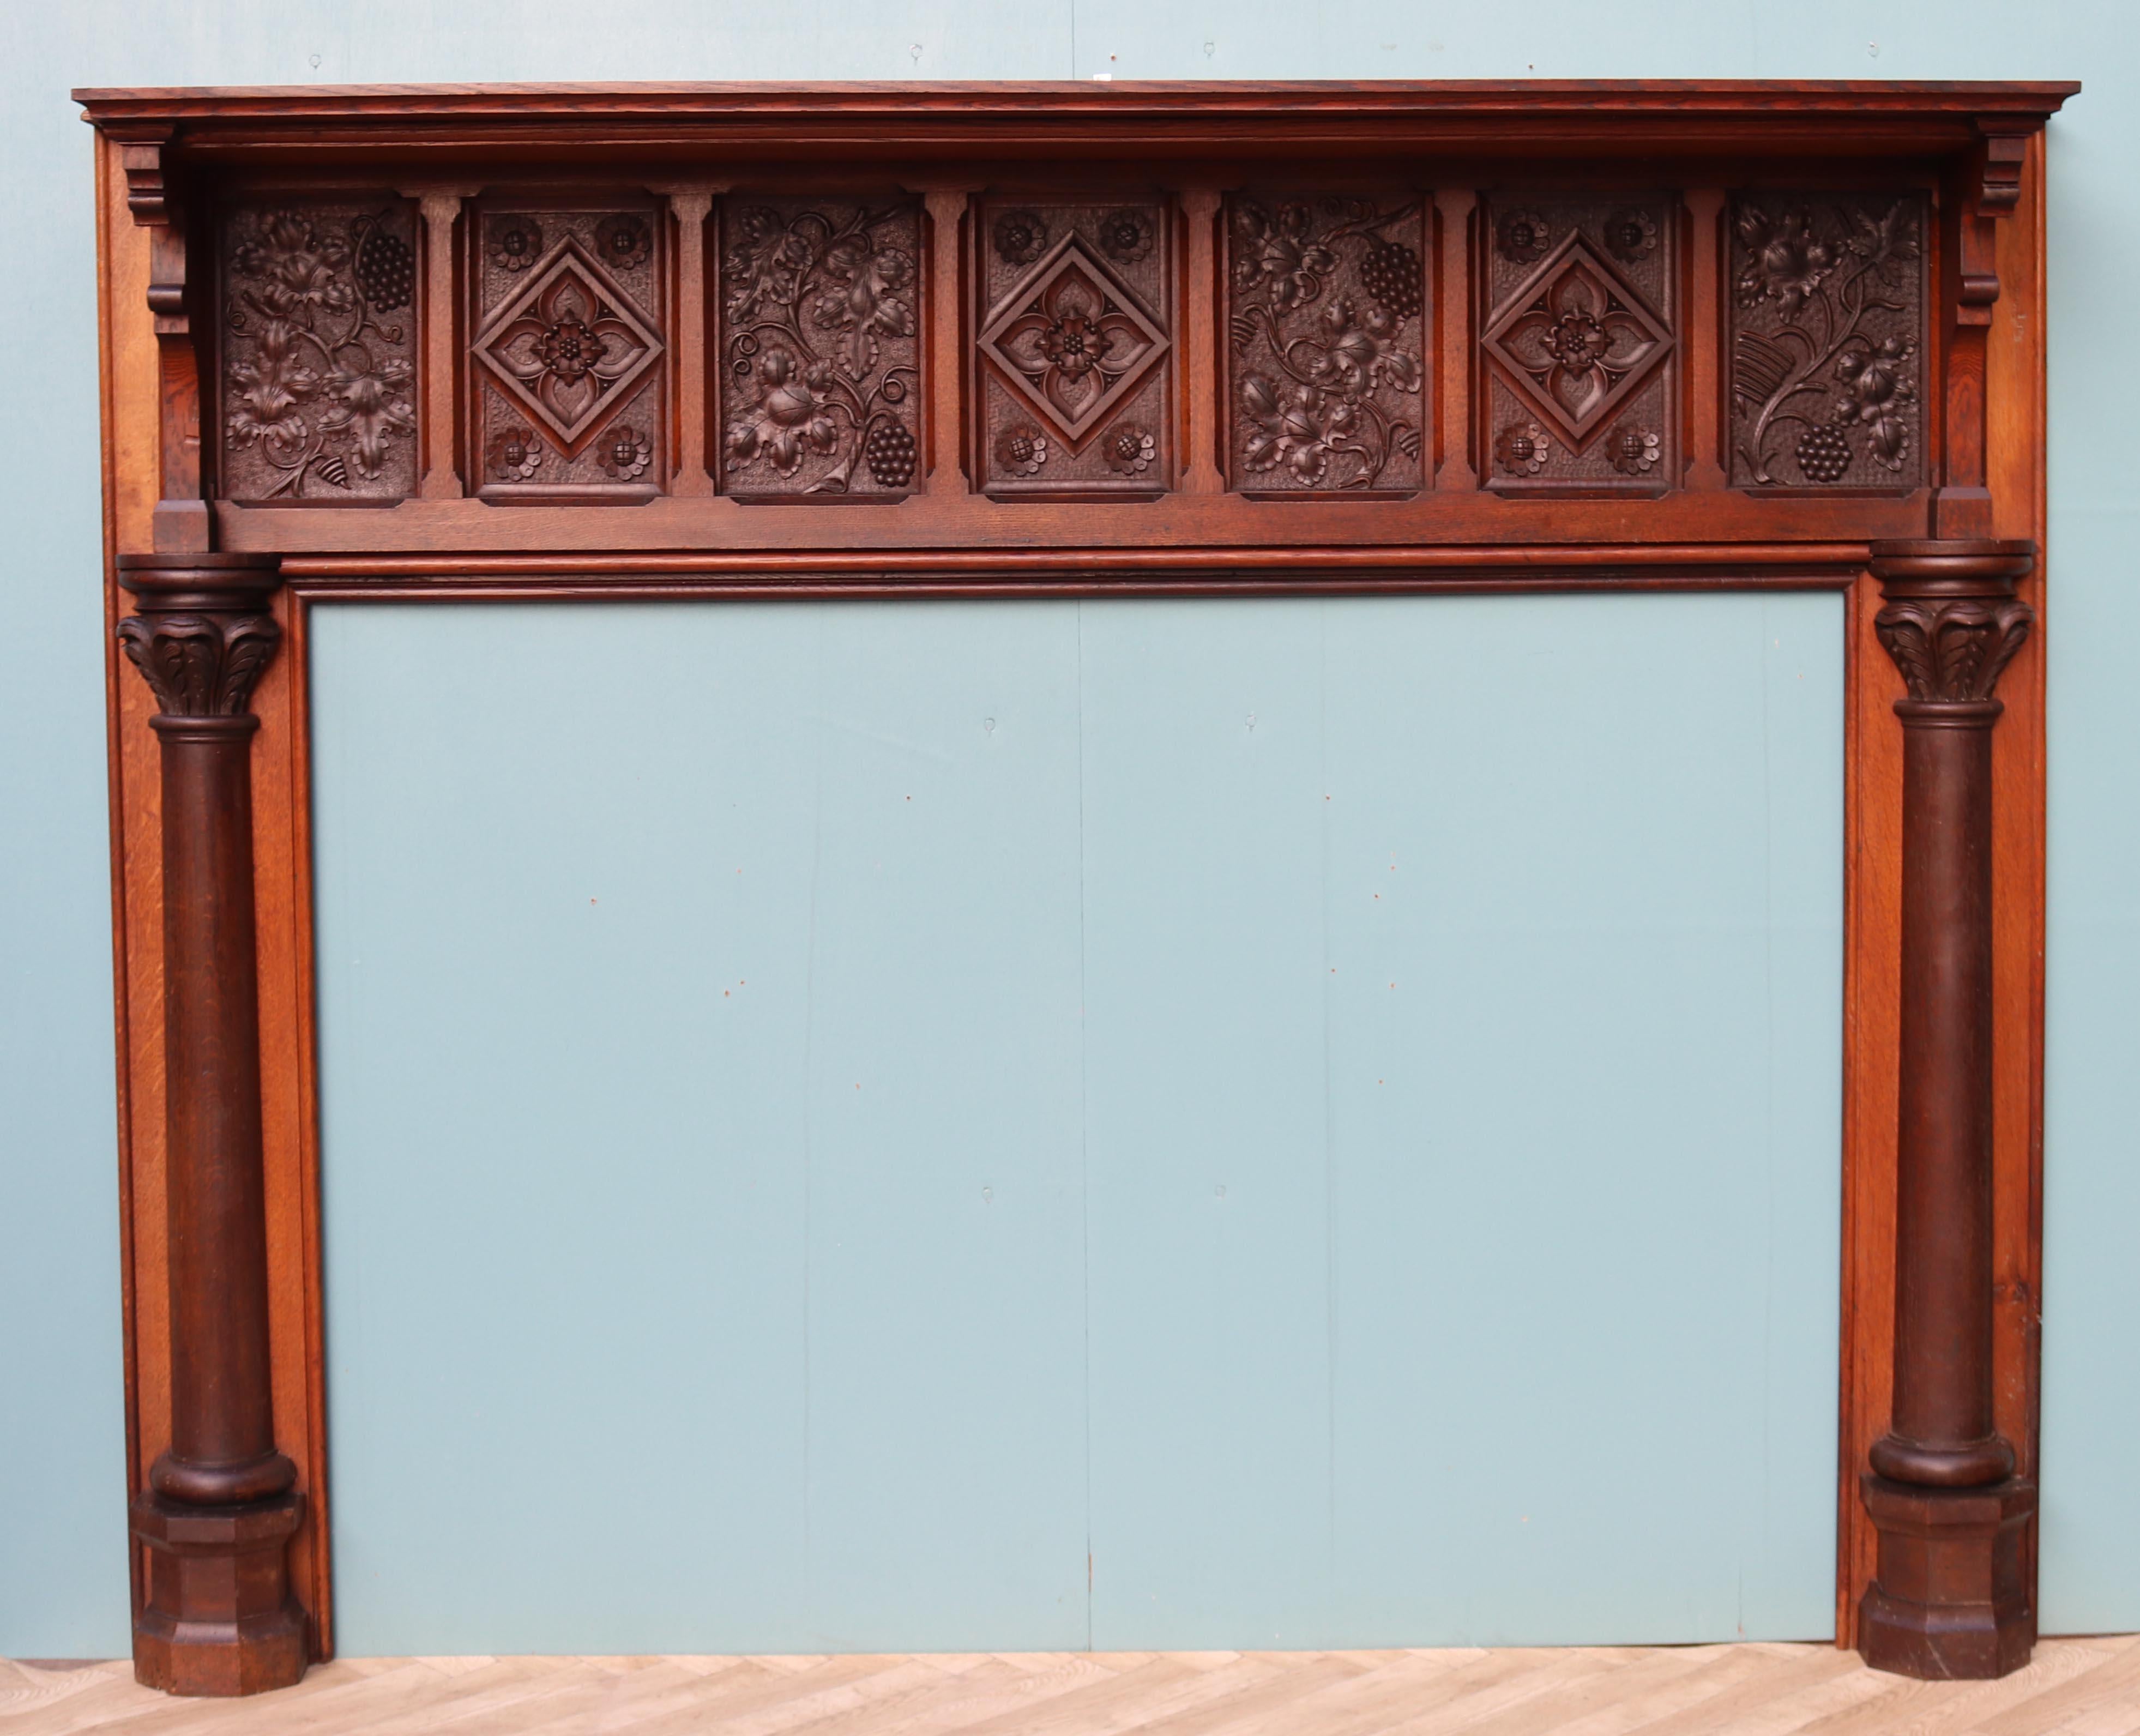 English Arts and Crafts Style Carved Oak Fireplace In Good Condition For Sale In Wormelow, Herefordshire